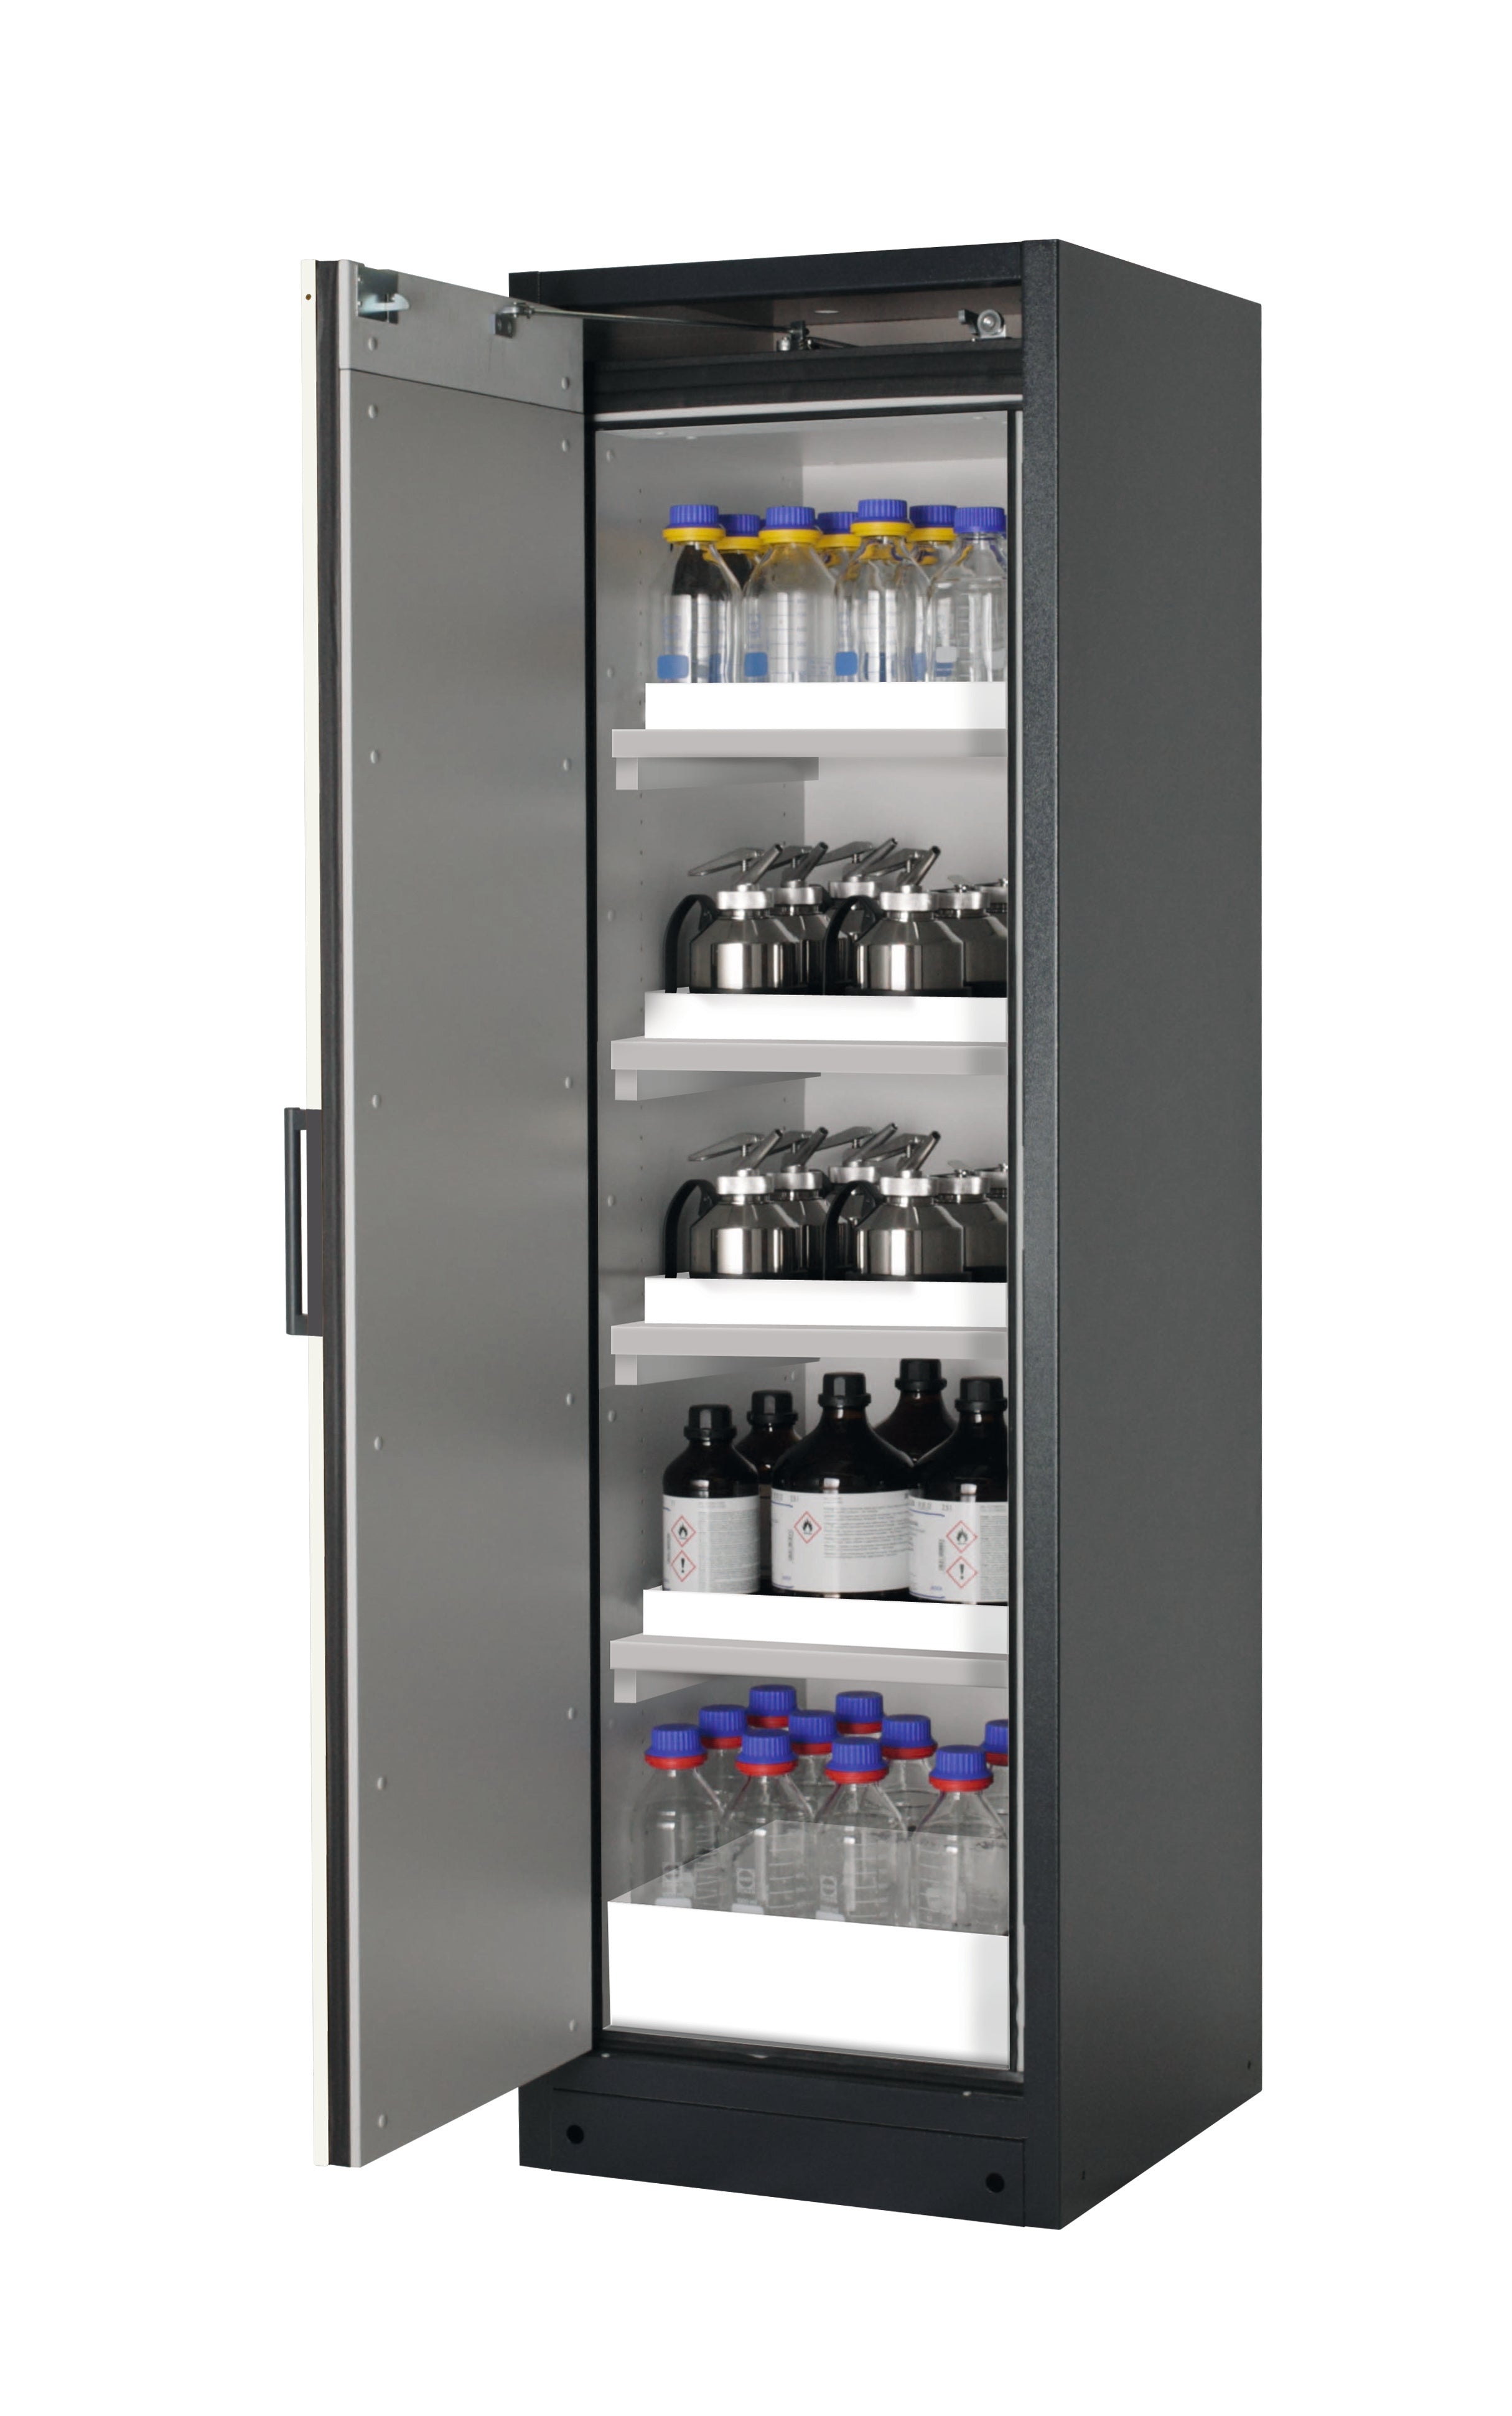 Type 90 safety storage cabinet Q-PEGASUS-90 model Q90.195.060.WDAC in asecos silver with 4x tray shelf (standard) (polypropylene),